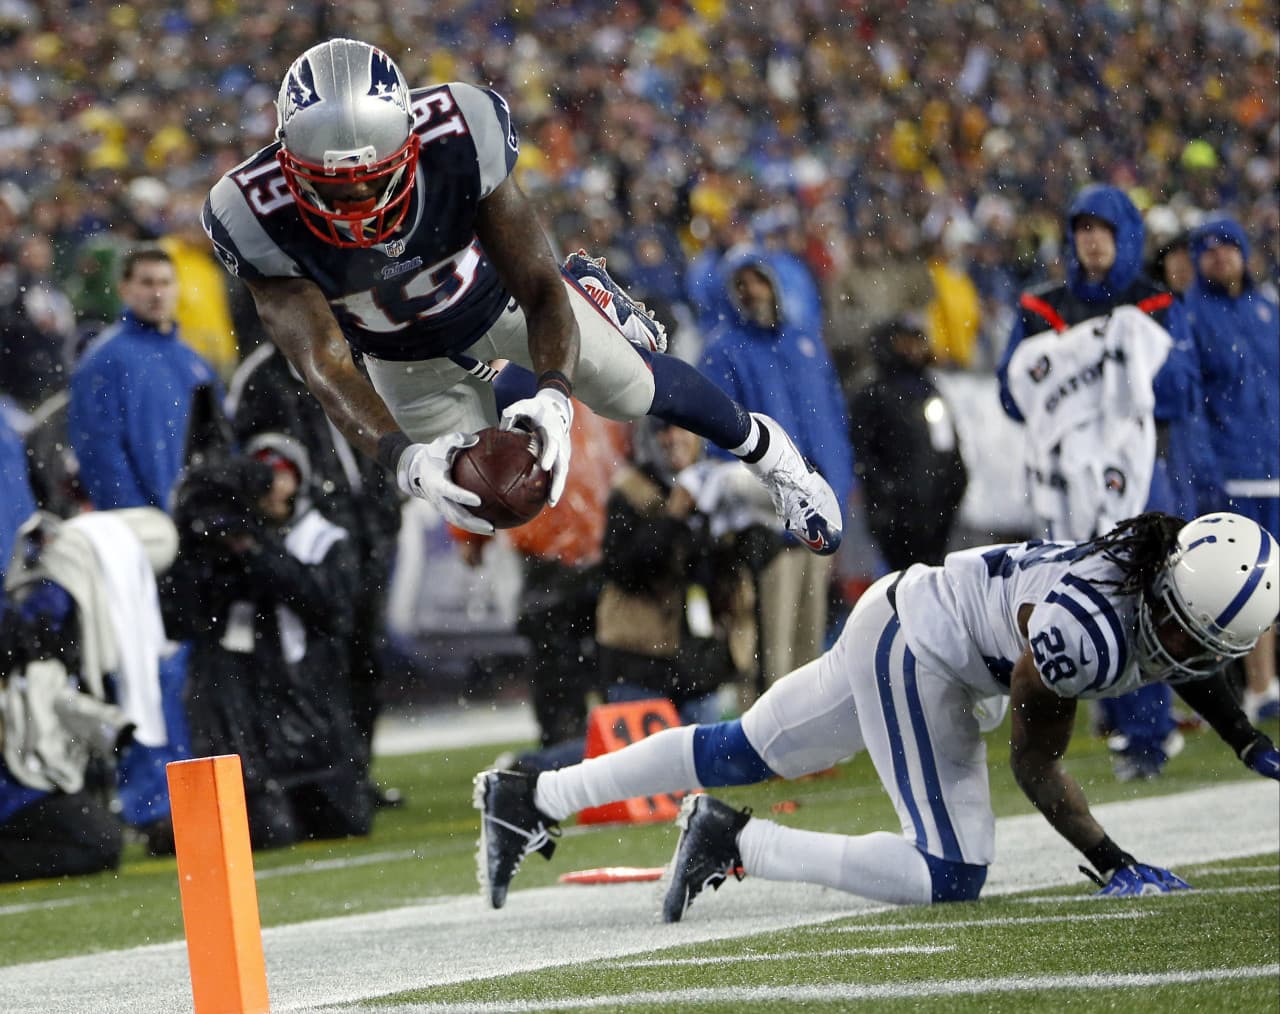 New England Patriots wide receiver Brandon LaFell (19) dives over Indianapolis Colts cornerback Greg Toler (28), but he had stepped out of bounds before reaching the end zone during the second half of the AFC Championship. (Julio Cortez/AP)